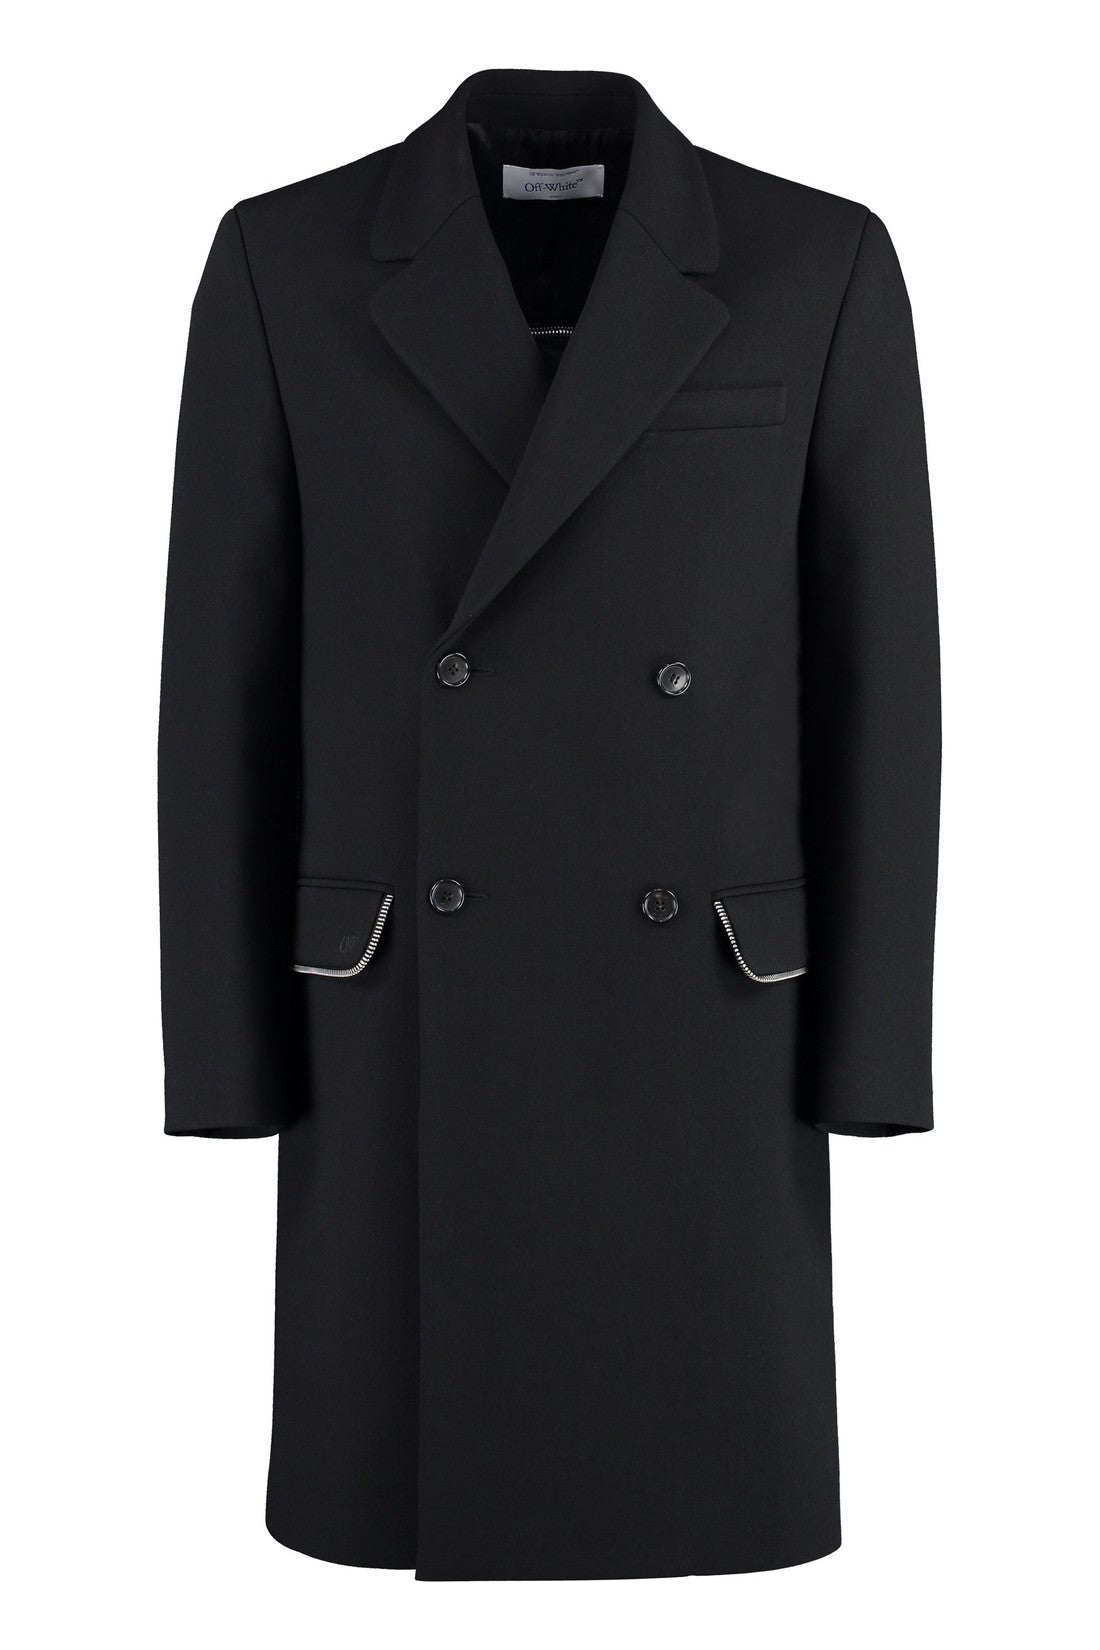 Off-White-OUTLET-SALE-Double-breasted virgin wool coat-ARCHIVIST